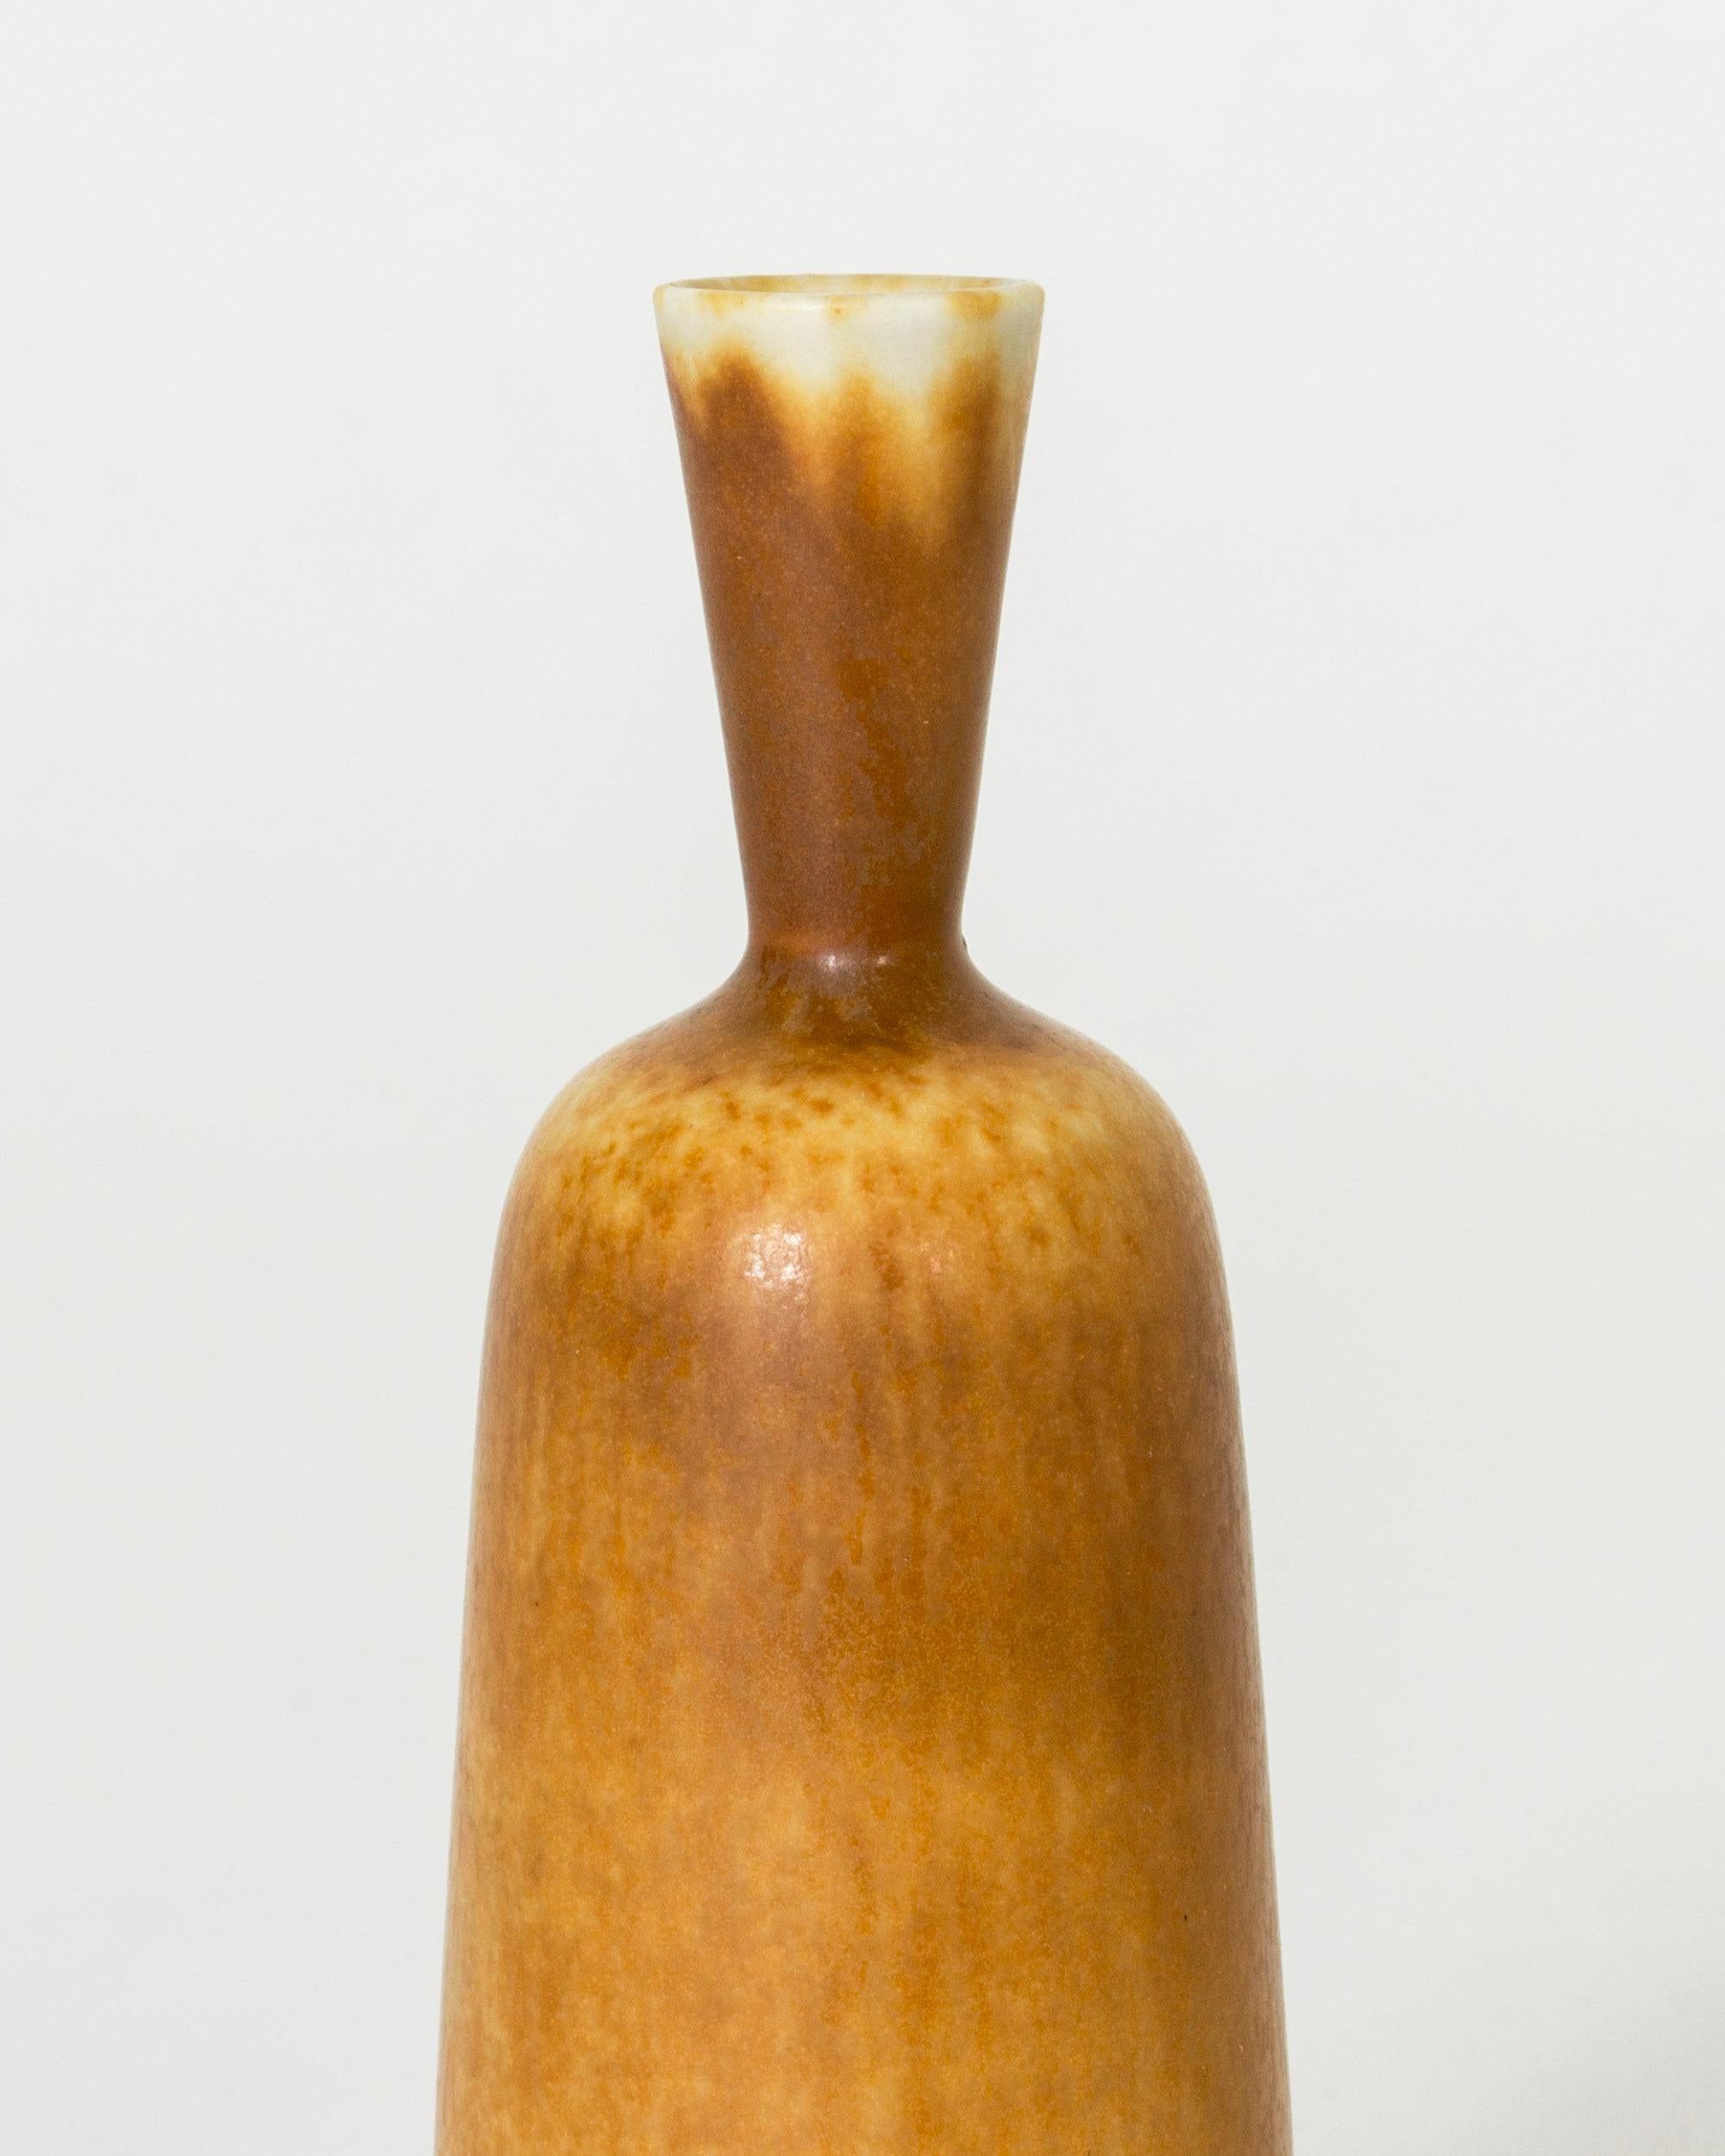 Tiny stoneware vase by Berndt Friberg, in a slender form with light brown and ochre hare’s fur glaze.

Berndt Friberg was a Swedish ceramicist, renowned for his stoneware vases and vessels for Gustavsberg. His pure, composed designs with satiny,